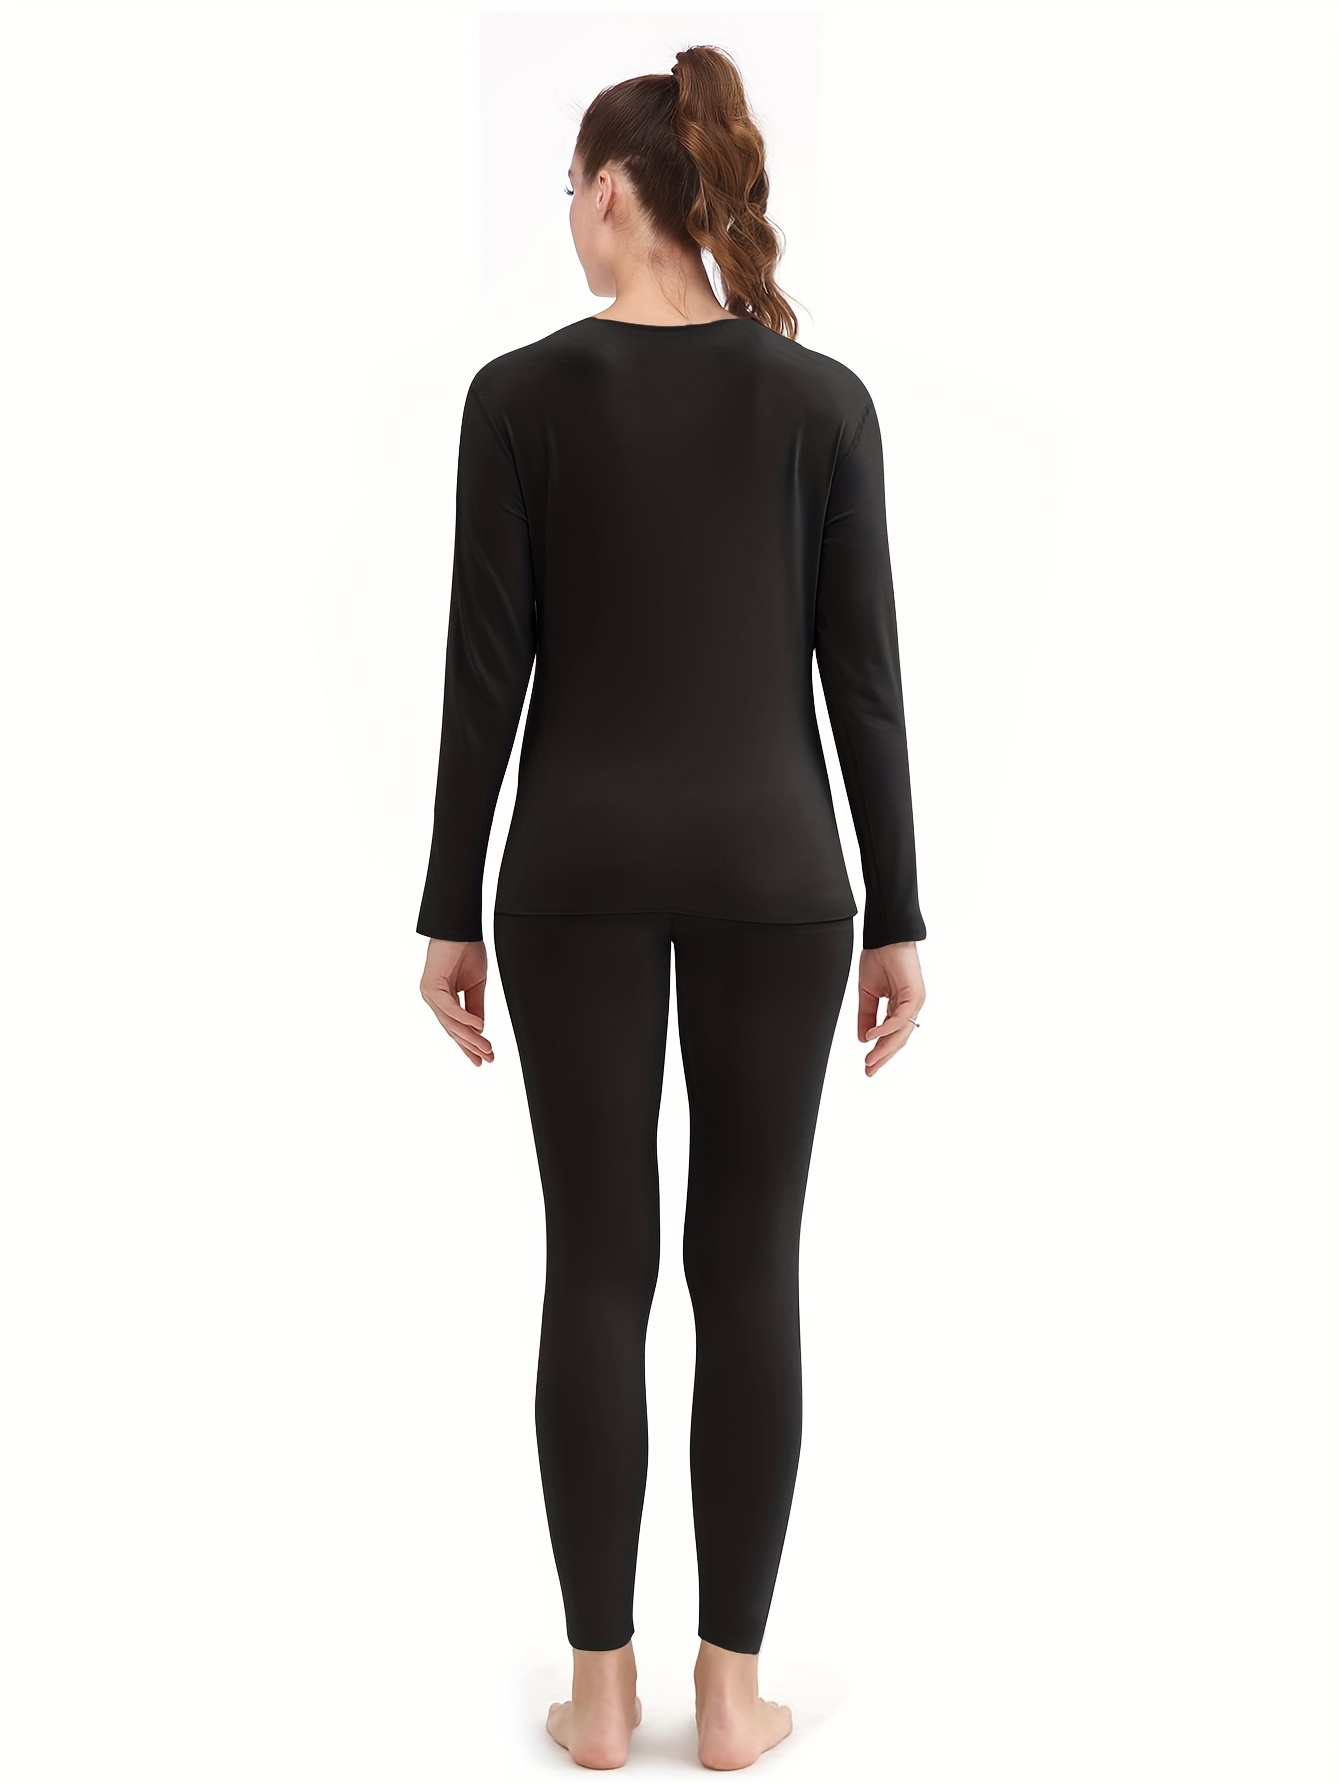 Thermal Underwear for Women (Thermal Long Johns) Sleeve Shirt